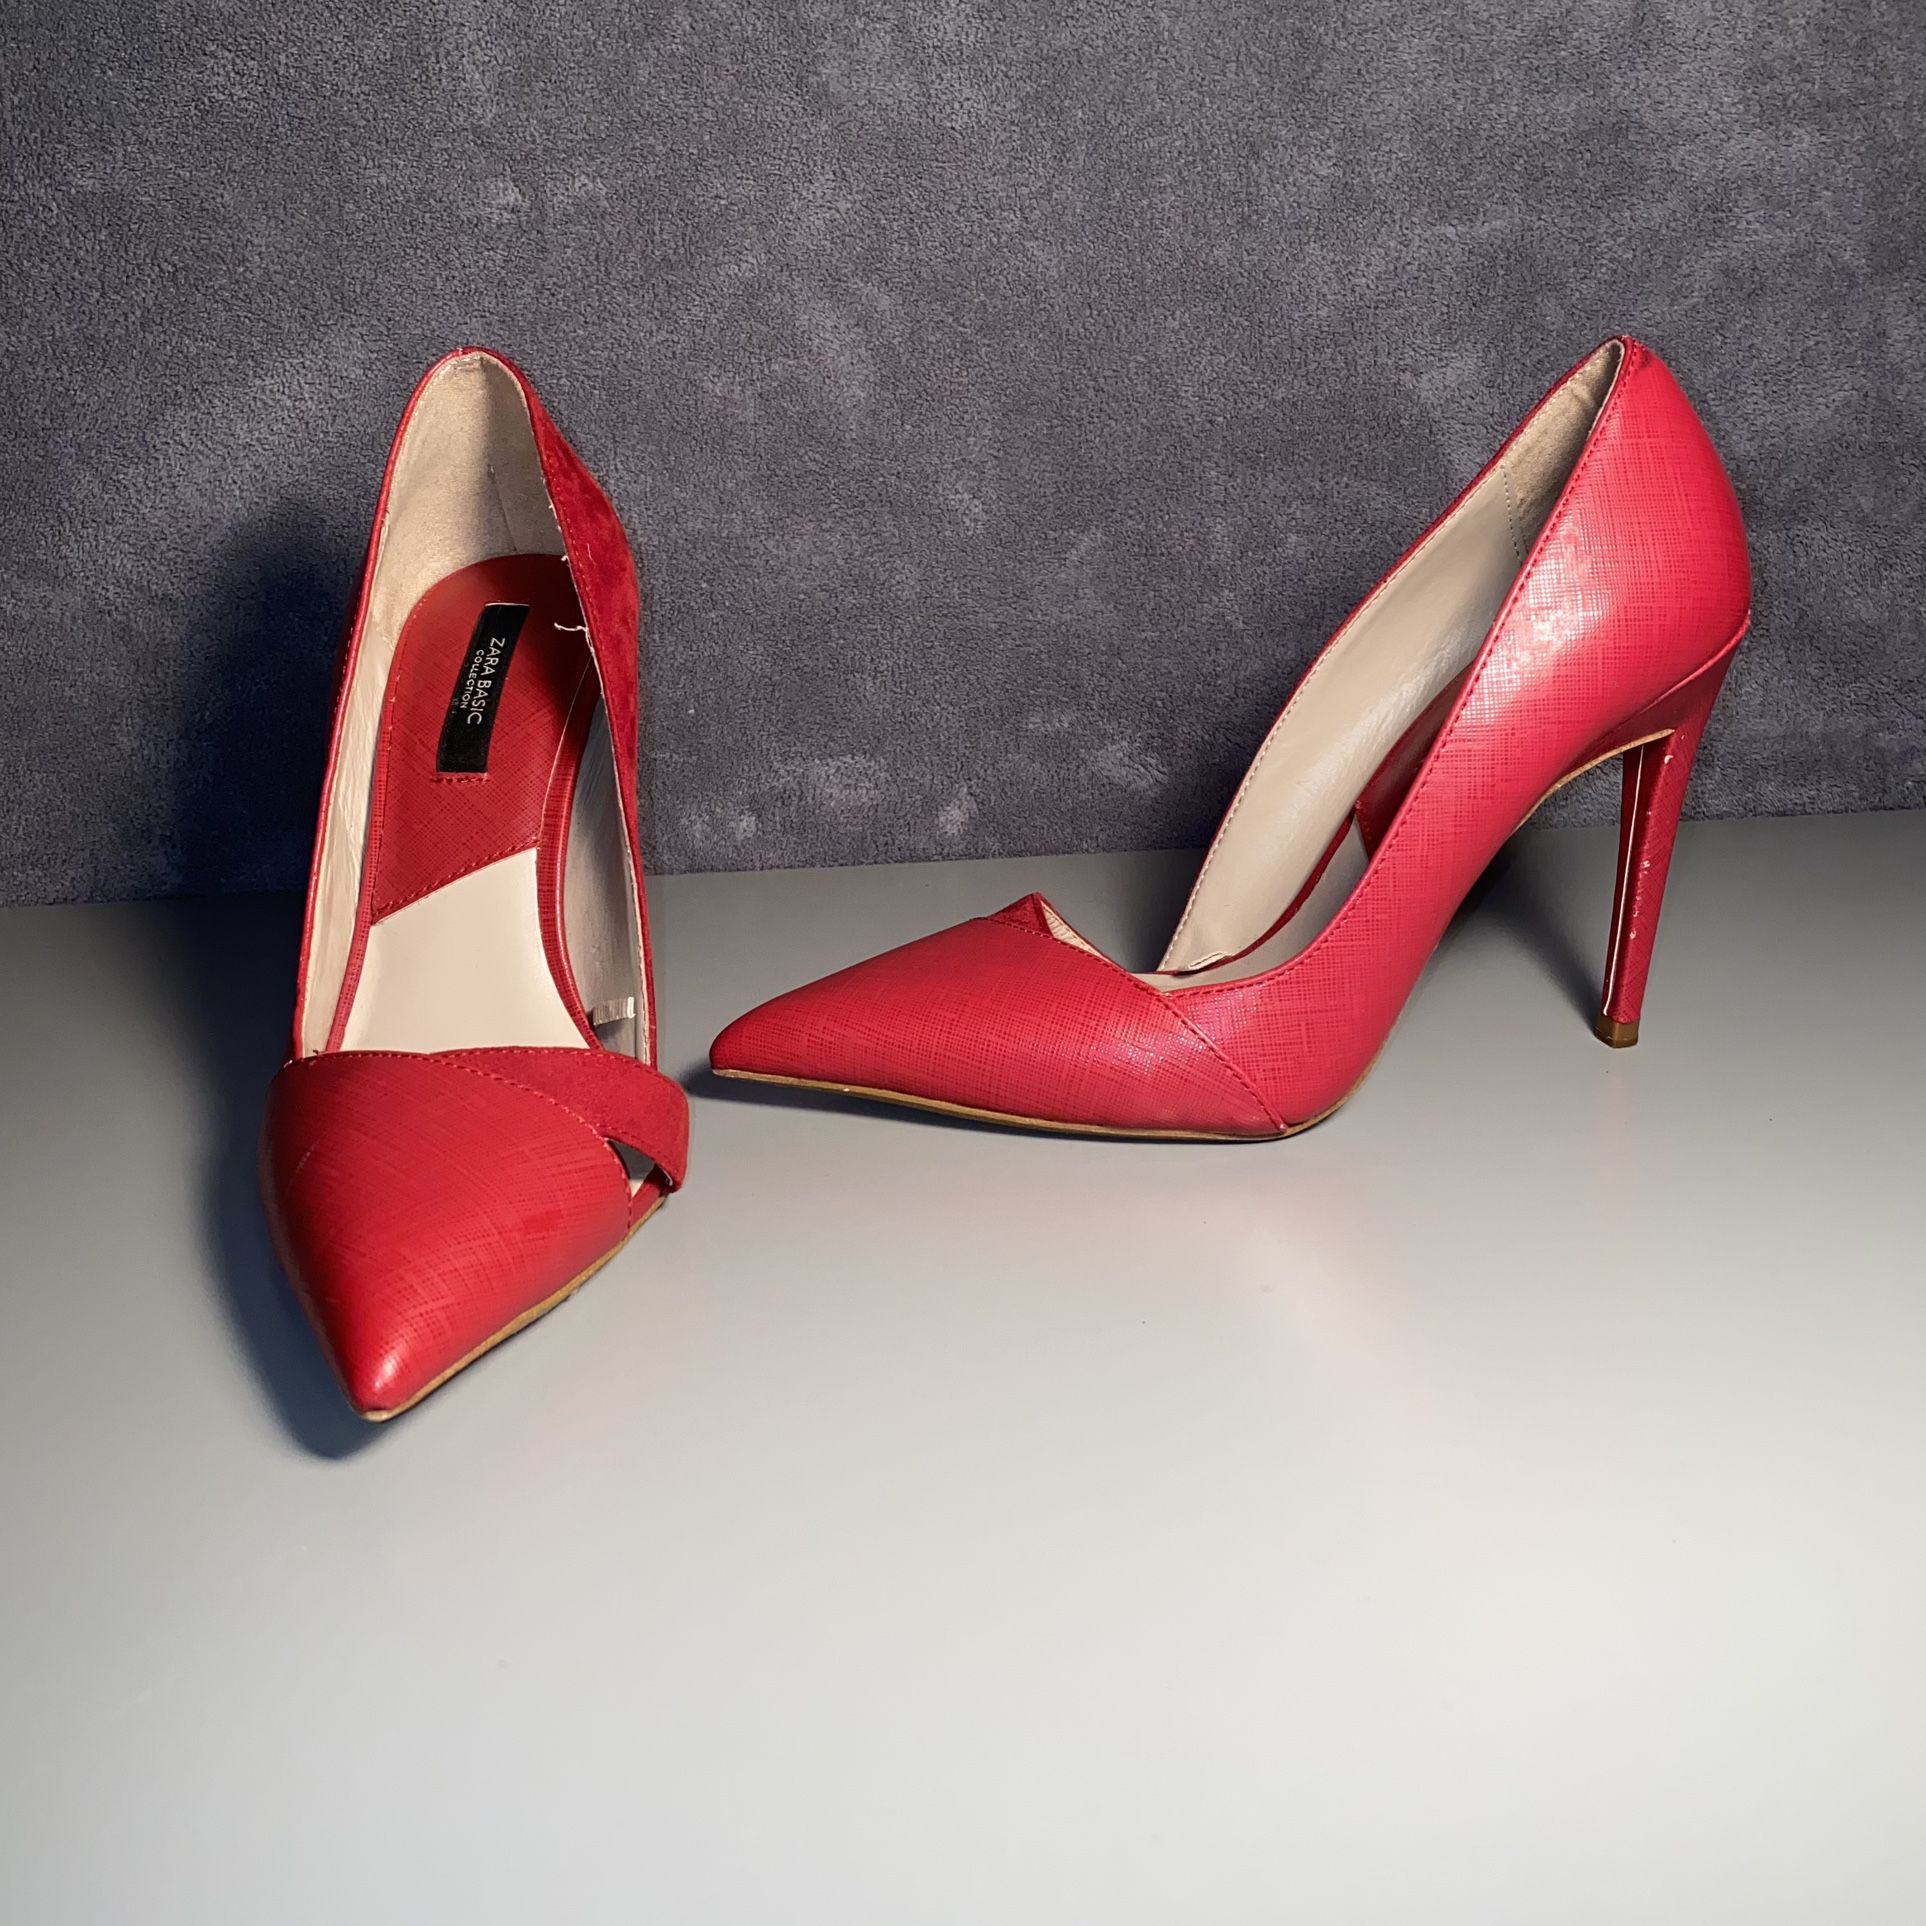 Zara Basic Collection Womens 6.5 37 Red Leather & Suede Pointy Toe 4” Heels